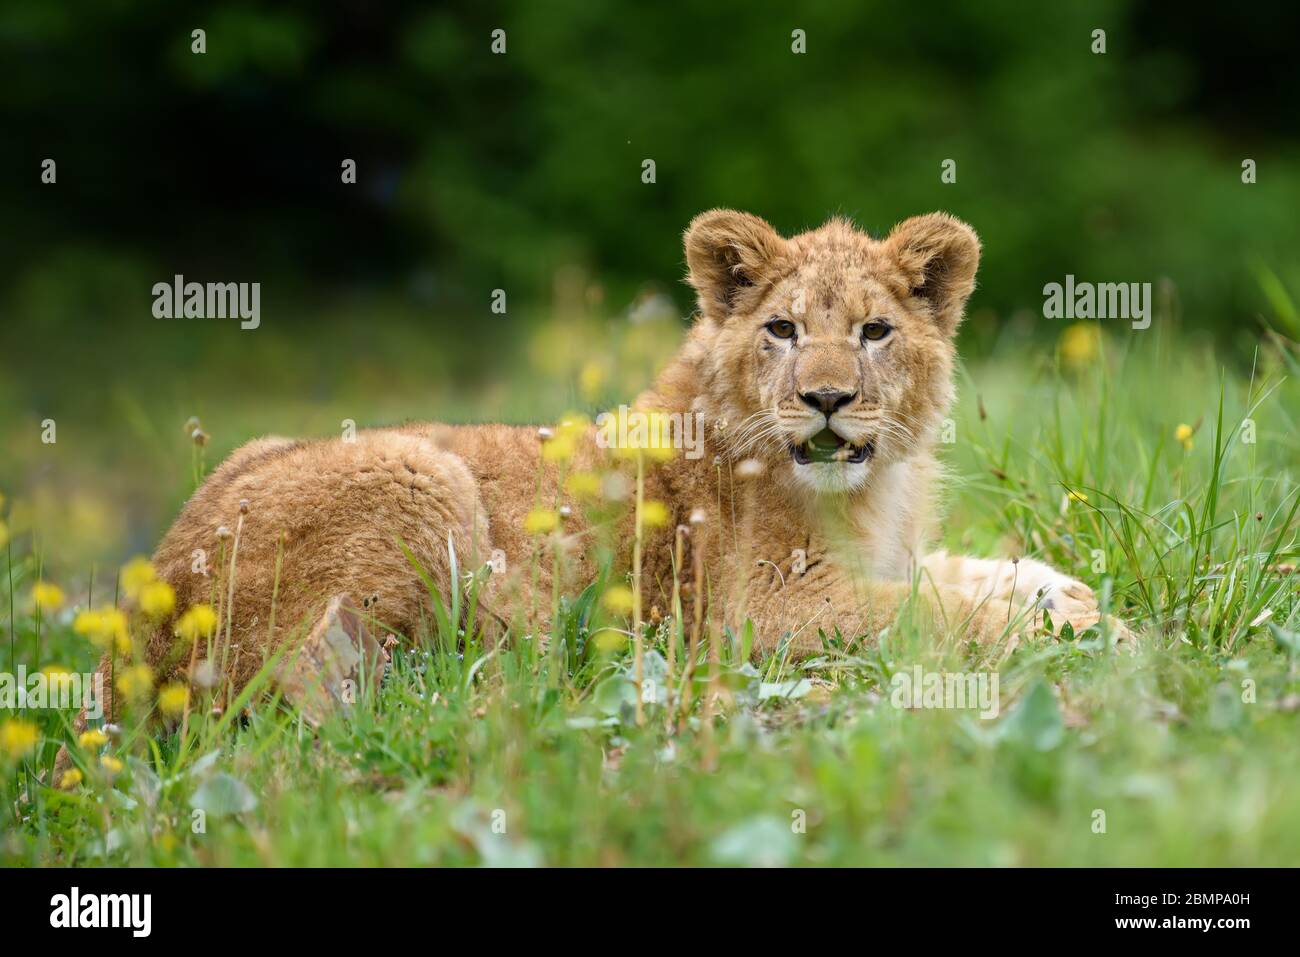 Lion cub in grass. Animal wild predators in natural environment. Wildlife scene from nature Stock Photo